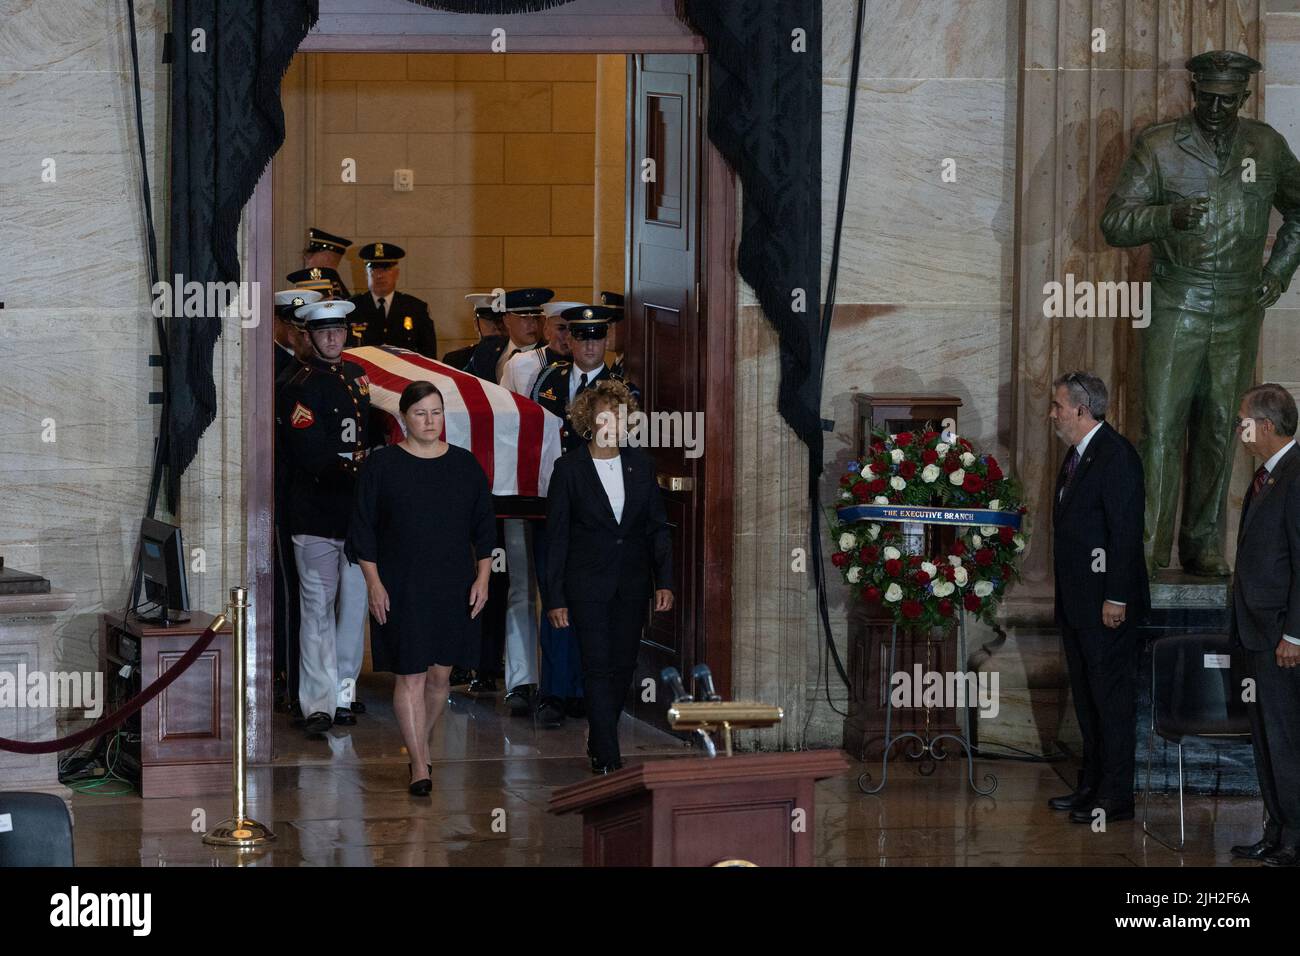 Washington DC, USA. 14th July, 2022. The casket of Marine Chief Warrant Officer 4 Hershel Woodrow 'Woody' Williams, the last surviving World War II Medal of Honor recipient, is carried into the Rotunda of the U.S. Capitol in Washington, DC on Thursday, July 14, 2022. The Marine Corps veteran, who died June 29th, was awarded the nation's highest award for his actions on Iwo Jima. Pool Photo by Eric Lee/UPI Credit: UPI/Alamy Live News Stock Photo